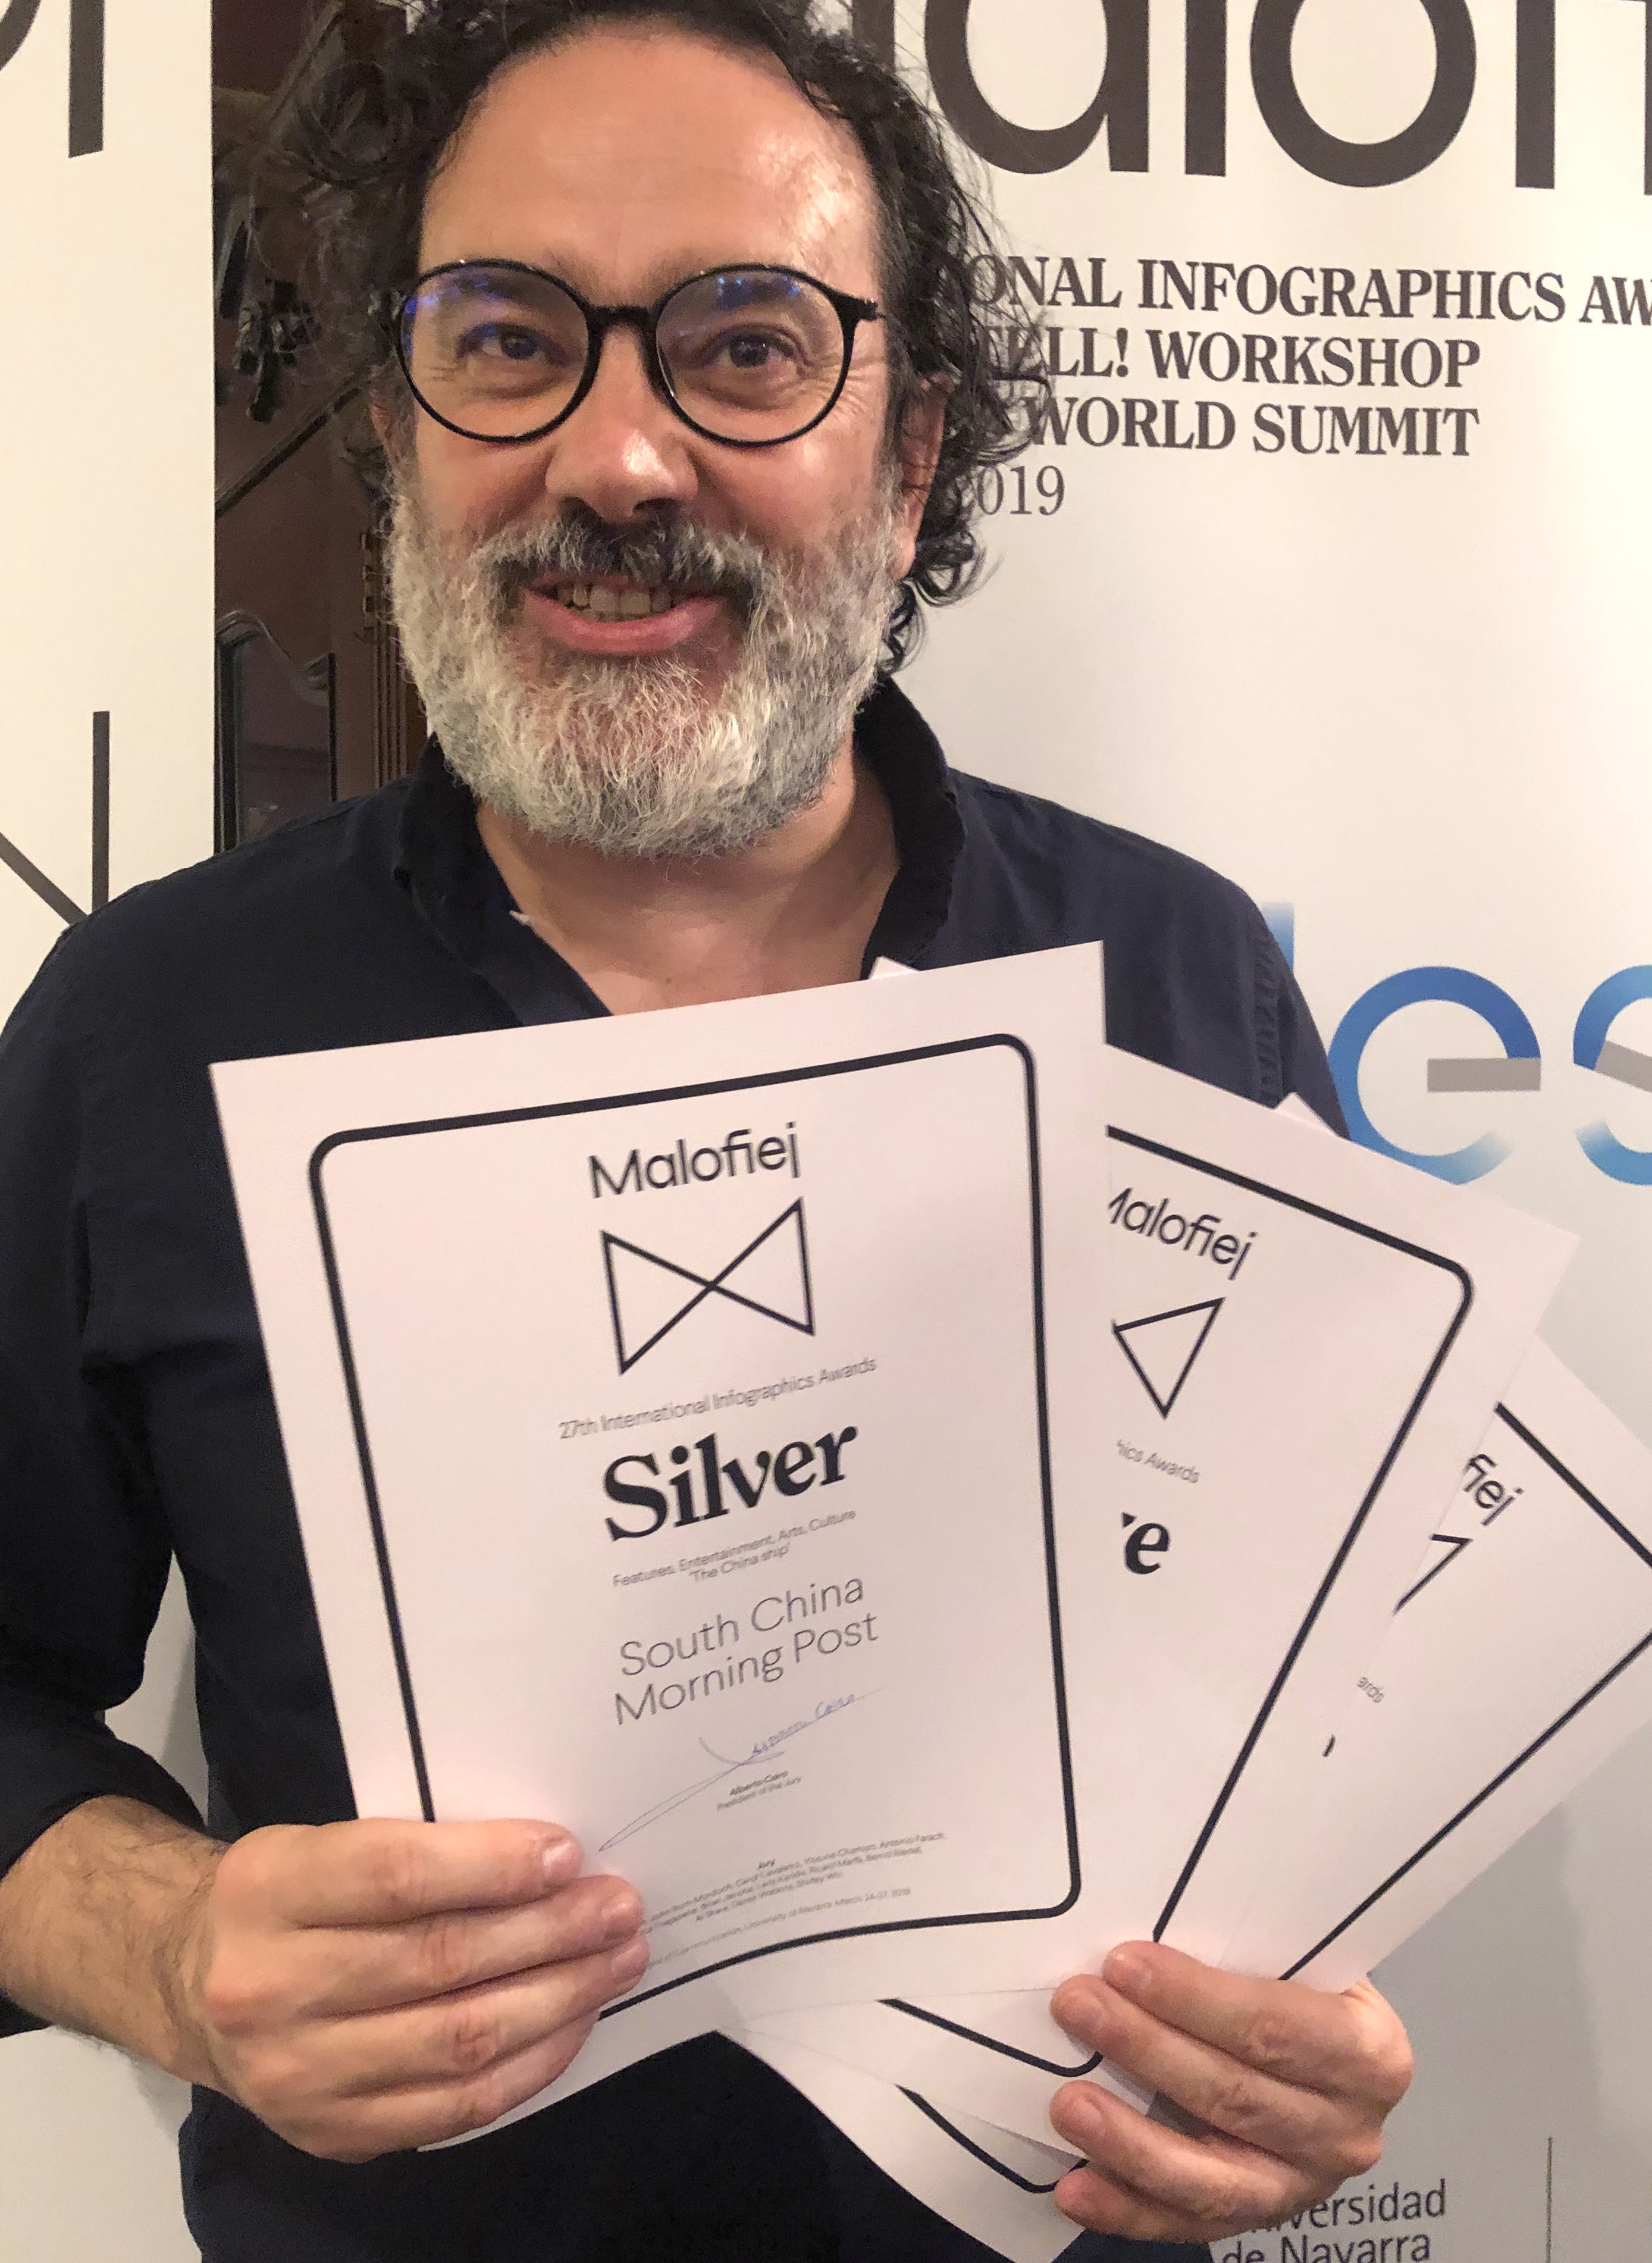 Deputy head of infographics Adolfo Arranz won silver medal for his story ‘The China Ship’. Photo: SCMP